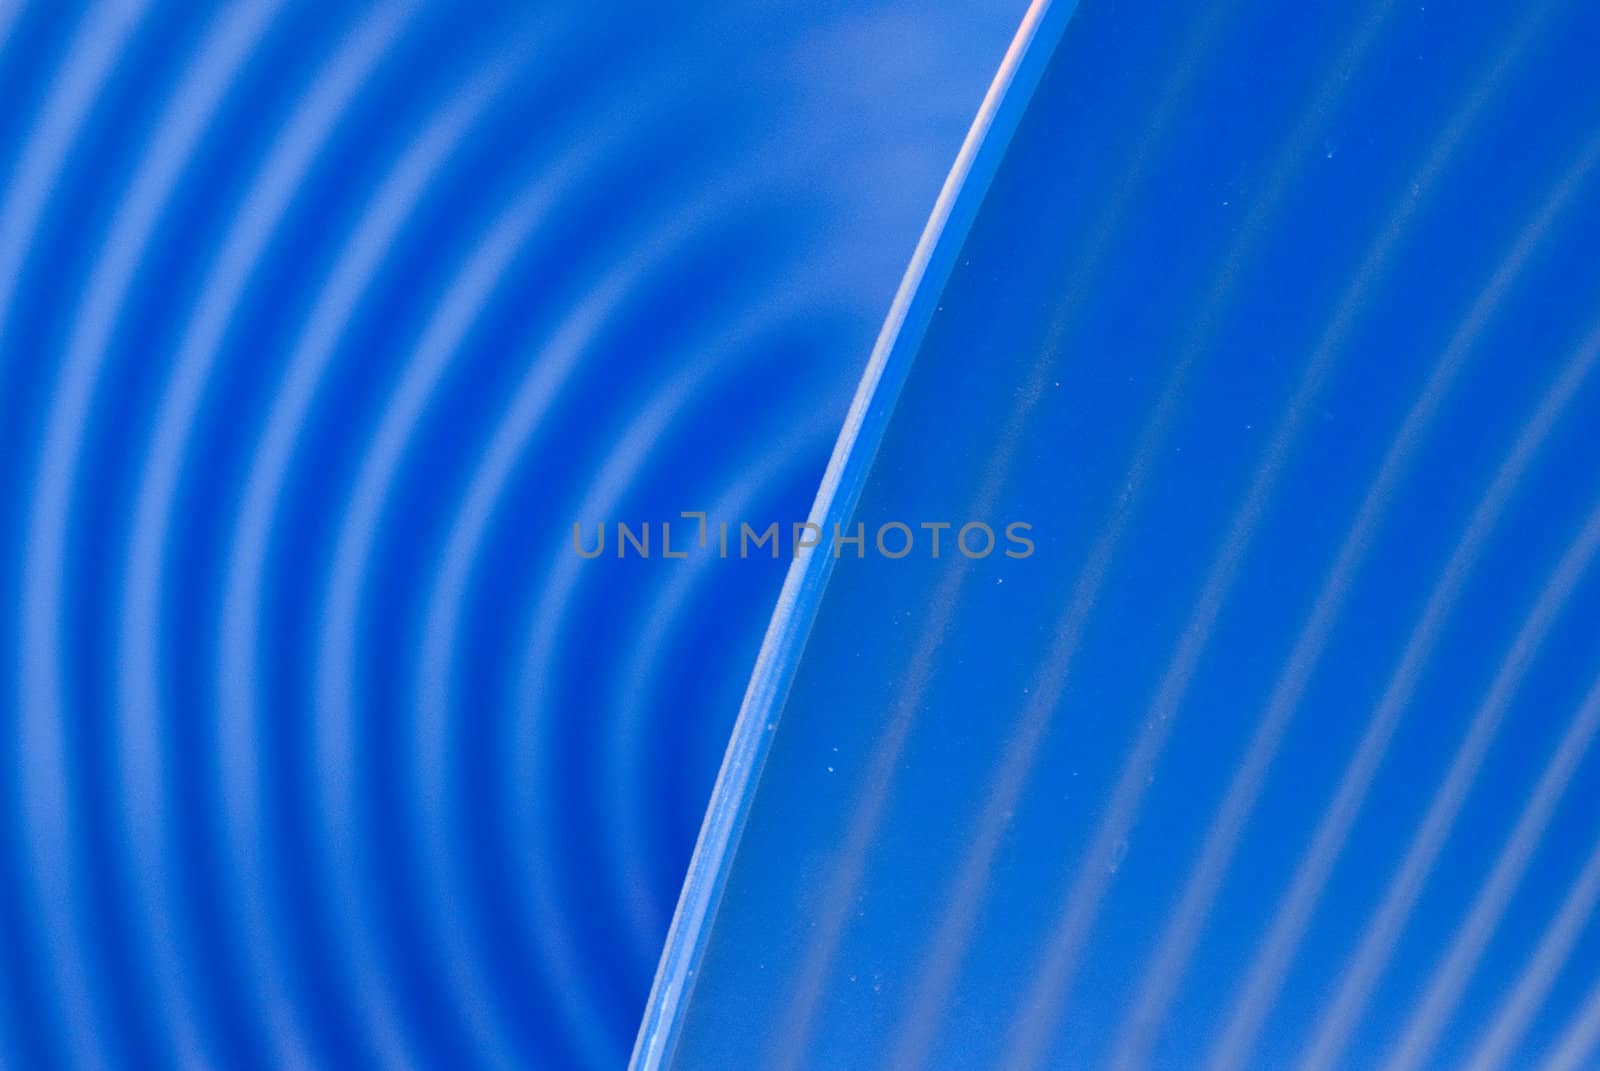 Textured blue plastic chair with swirls